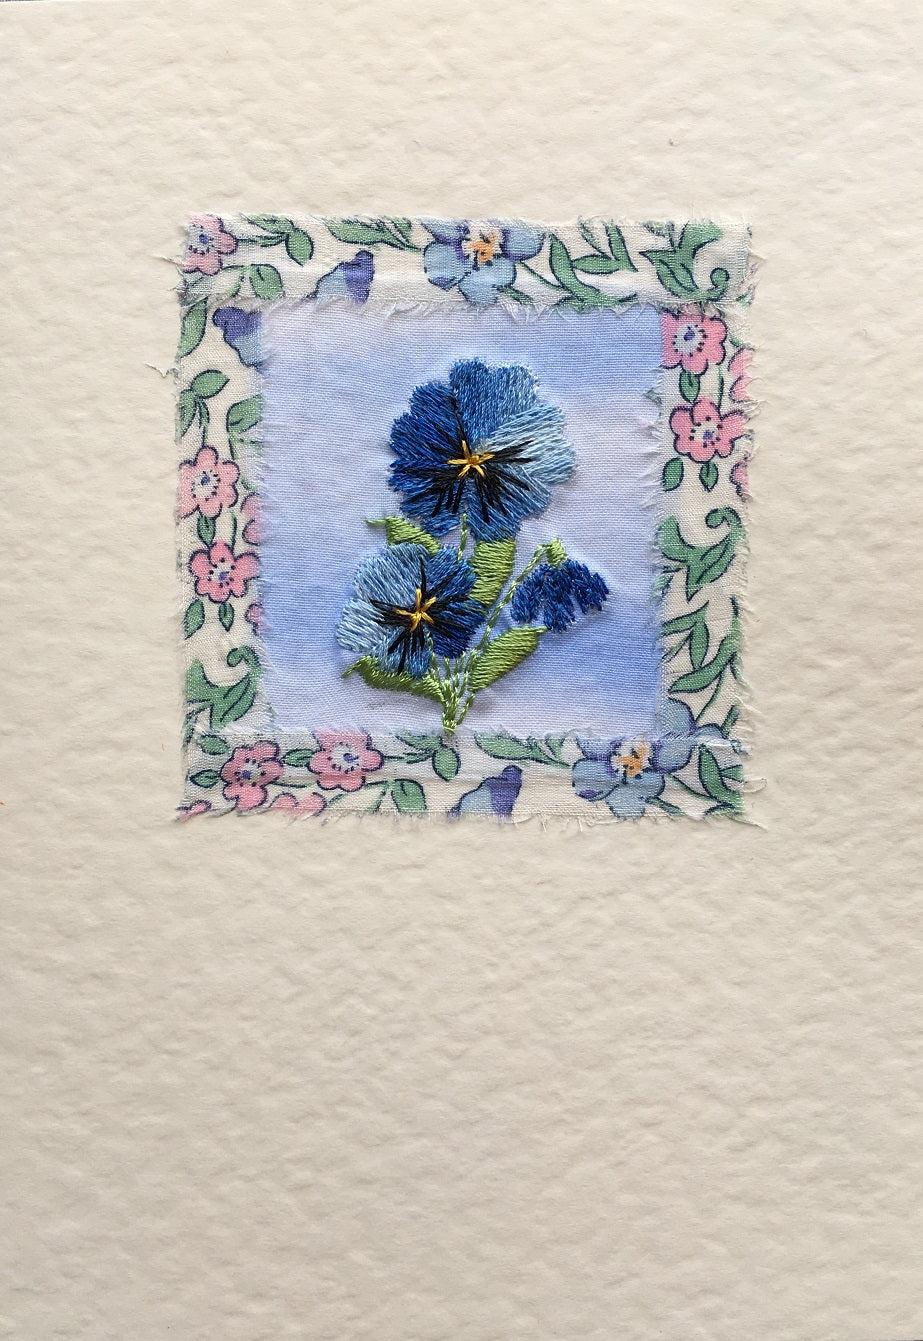 Blue pansy with Liberty print border